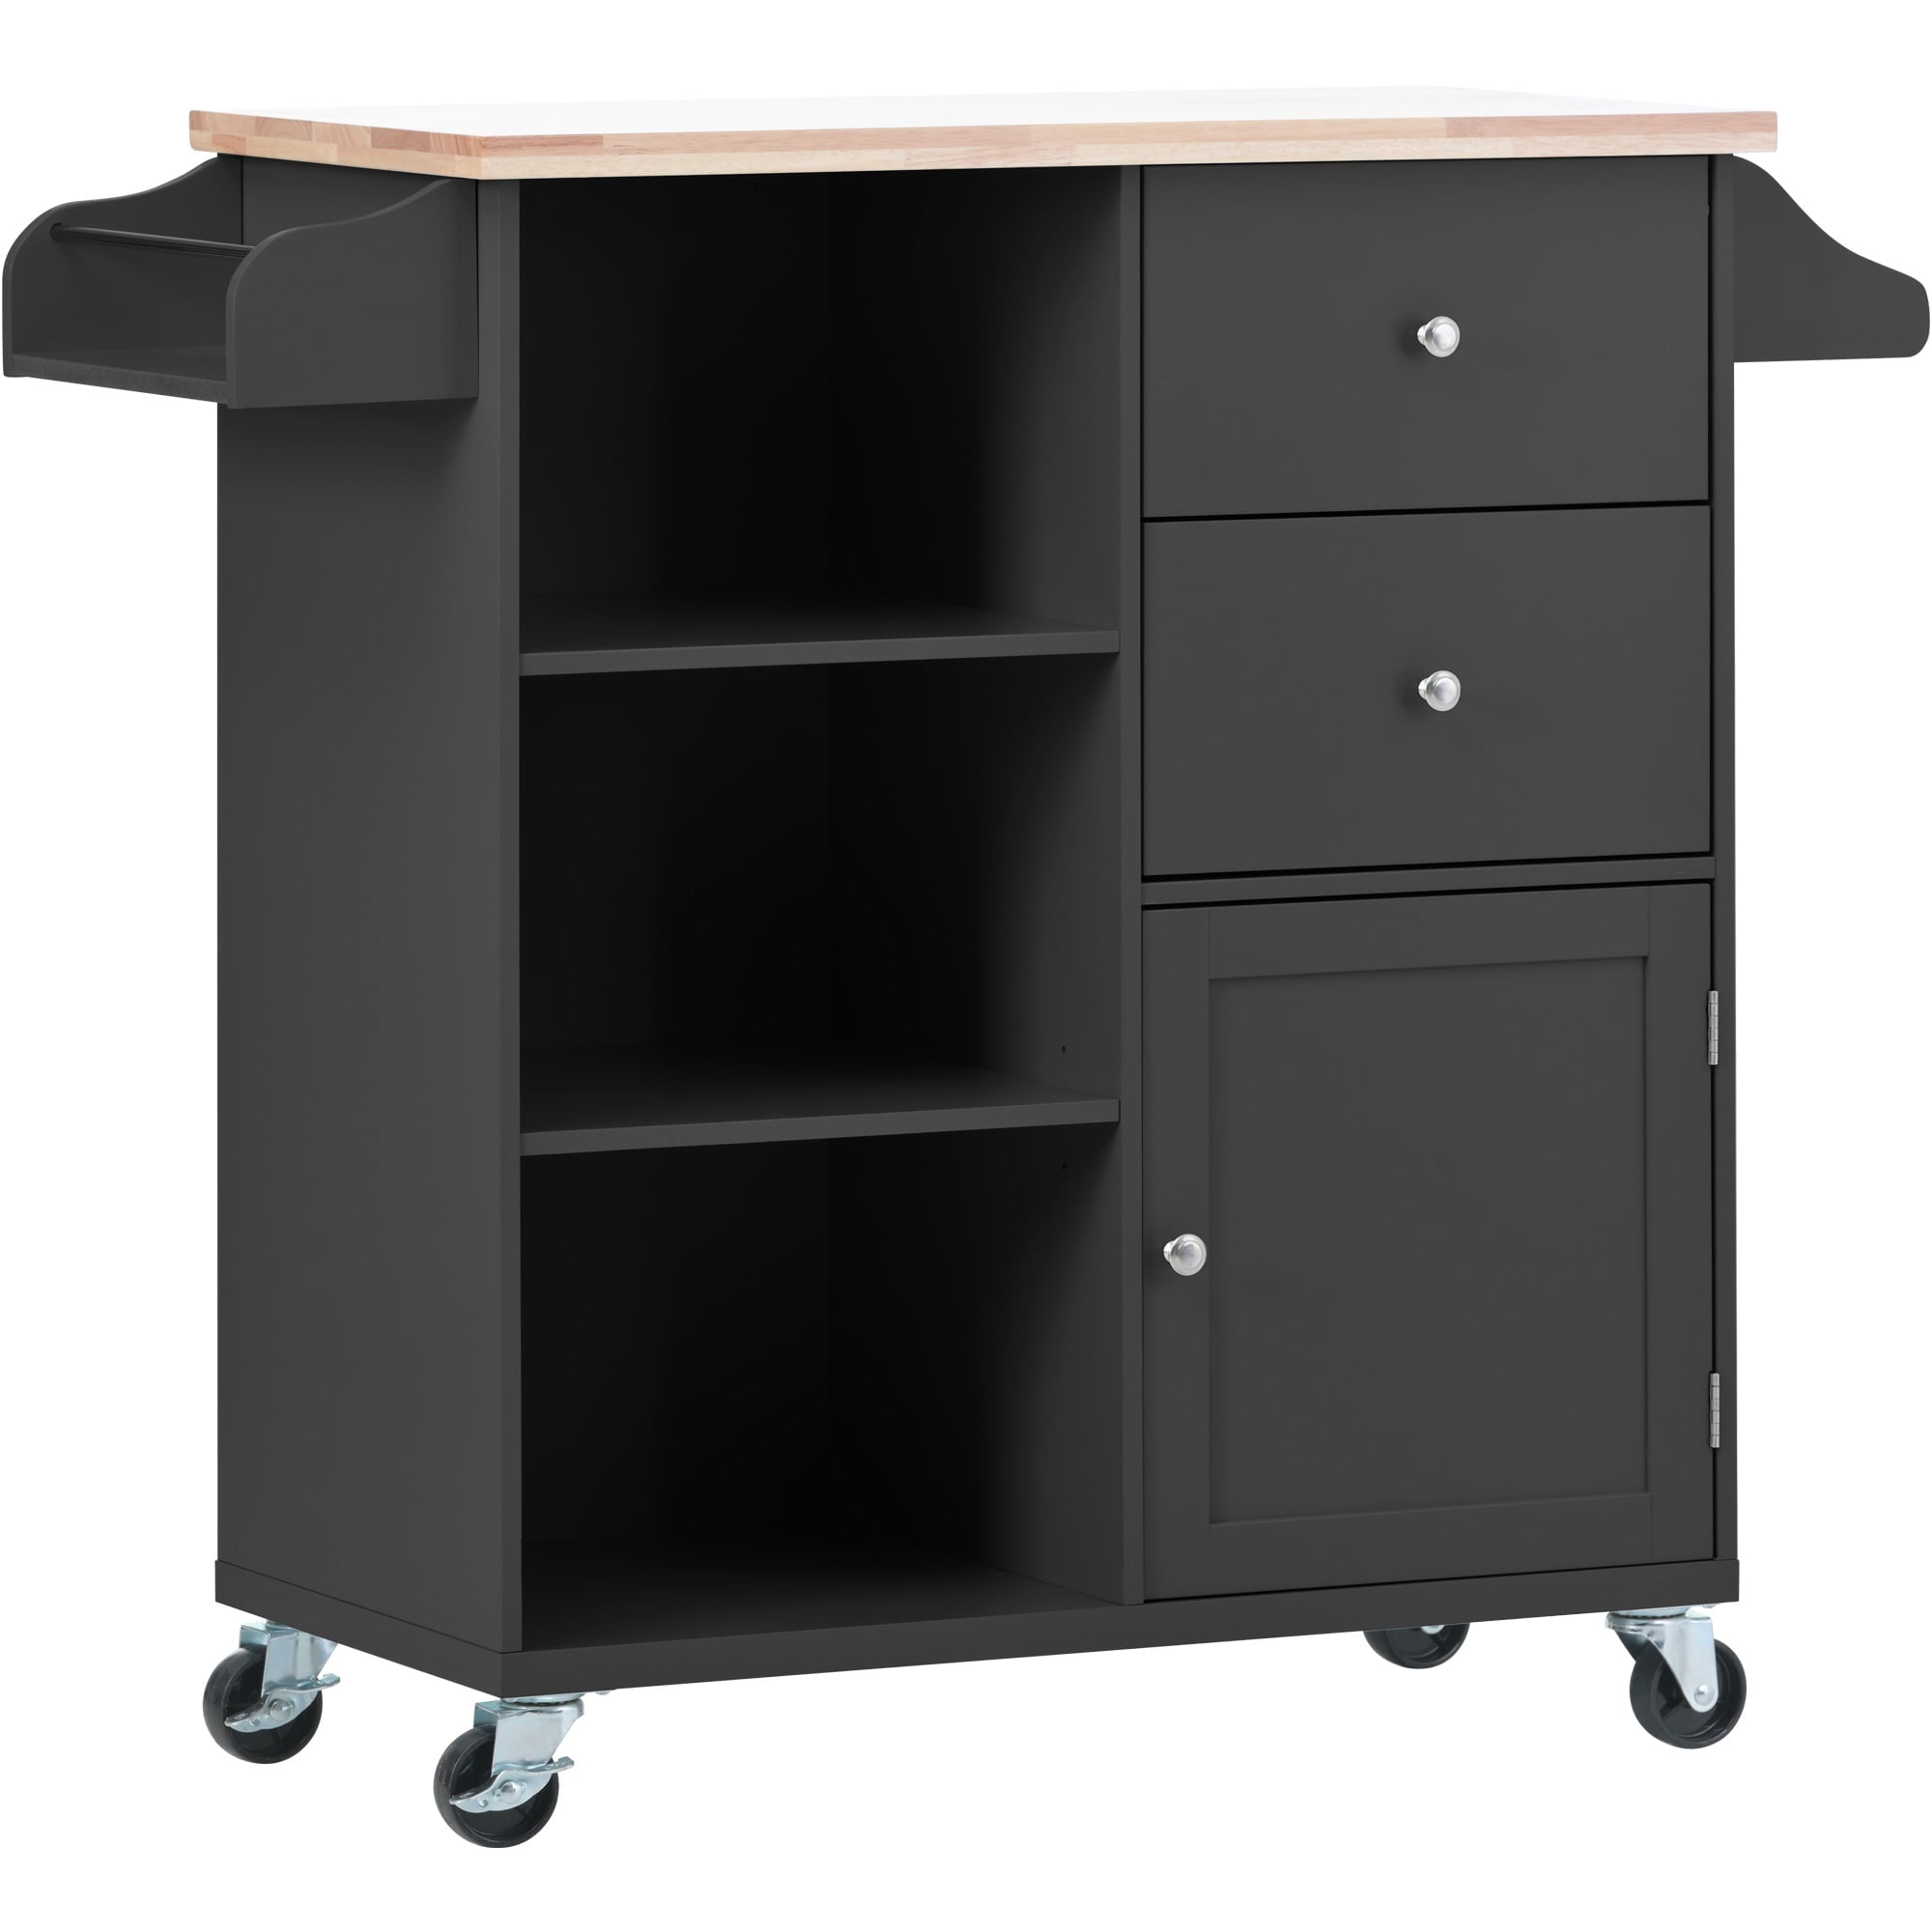 Kitchen Cart with Wheels， HSUNNS Wood Top Kitchen Island Cart with Storage Drawers|Open Shelves|Spice Rack|Towel Rack， Rolling Kitchen Cabinet Trolley Cart， Black